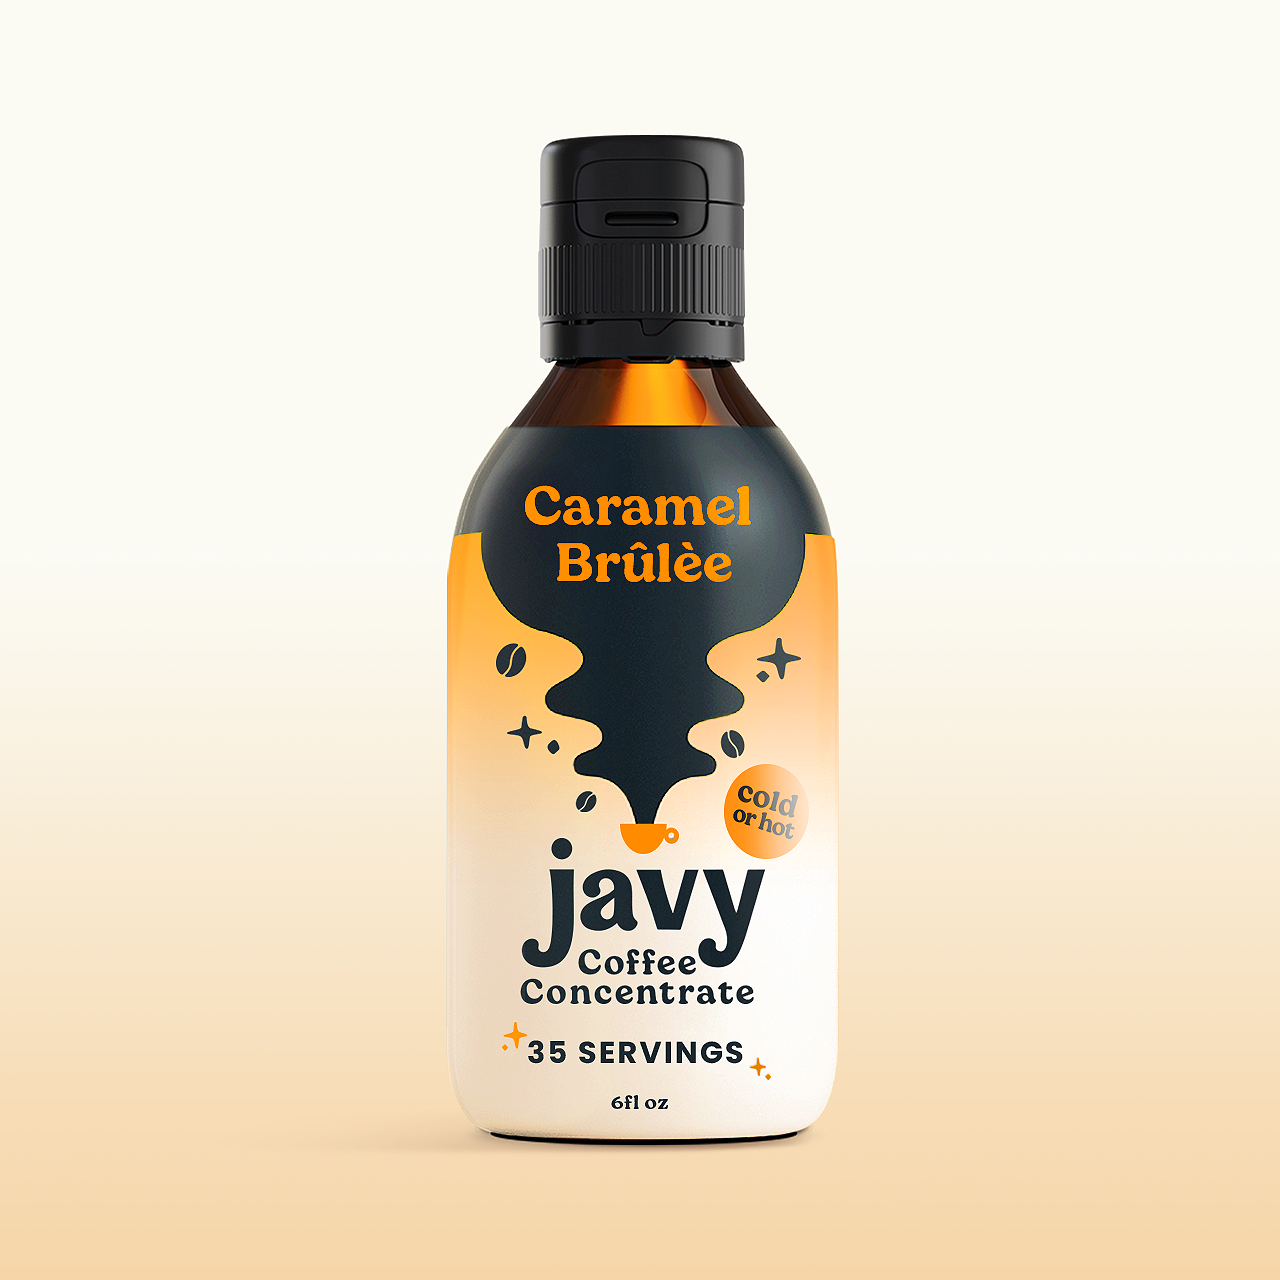 Caramel Brulee Coffee Concentrate